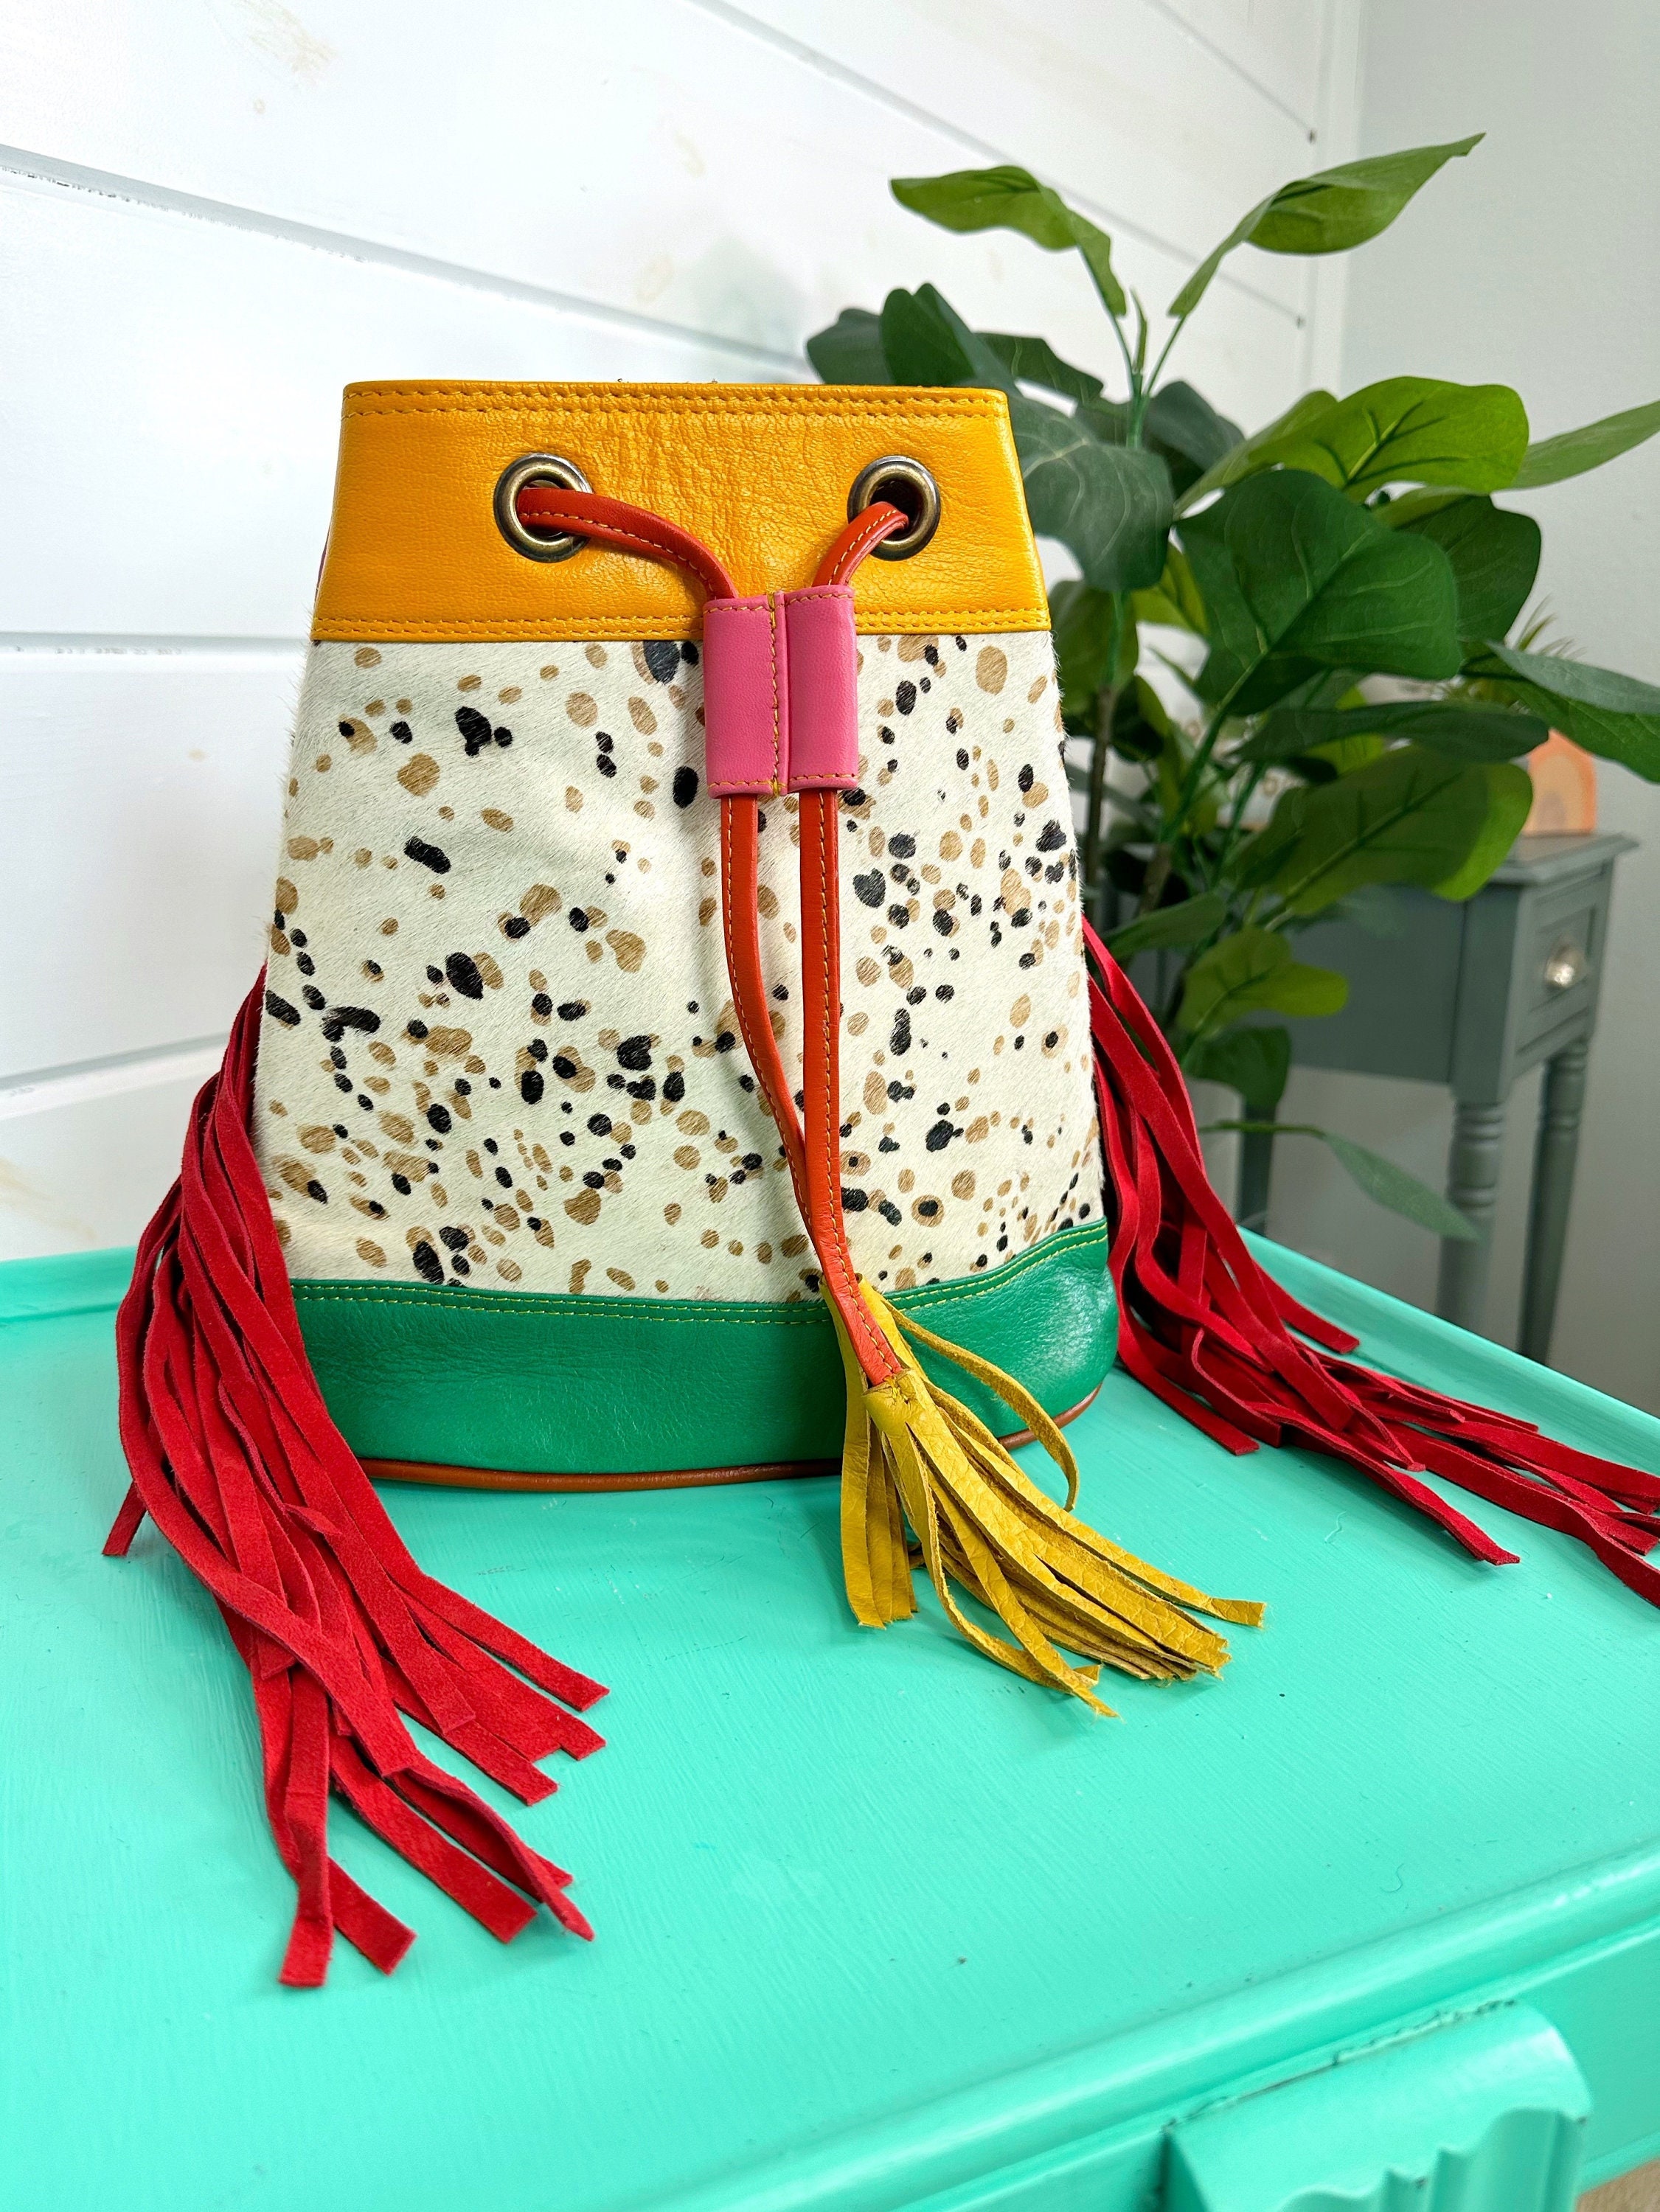 Colorful Fringe and Tassel Bags for Spring: The Bag That Will Transform Any  Outfit